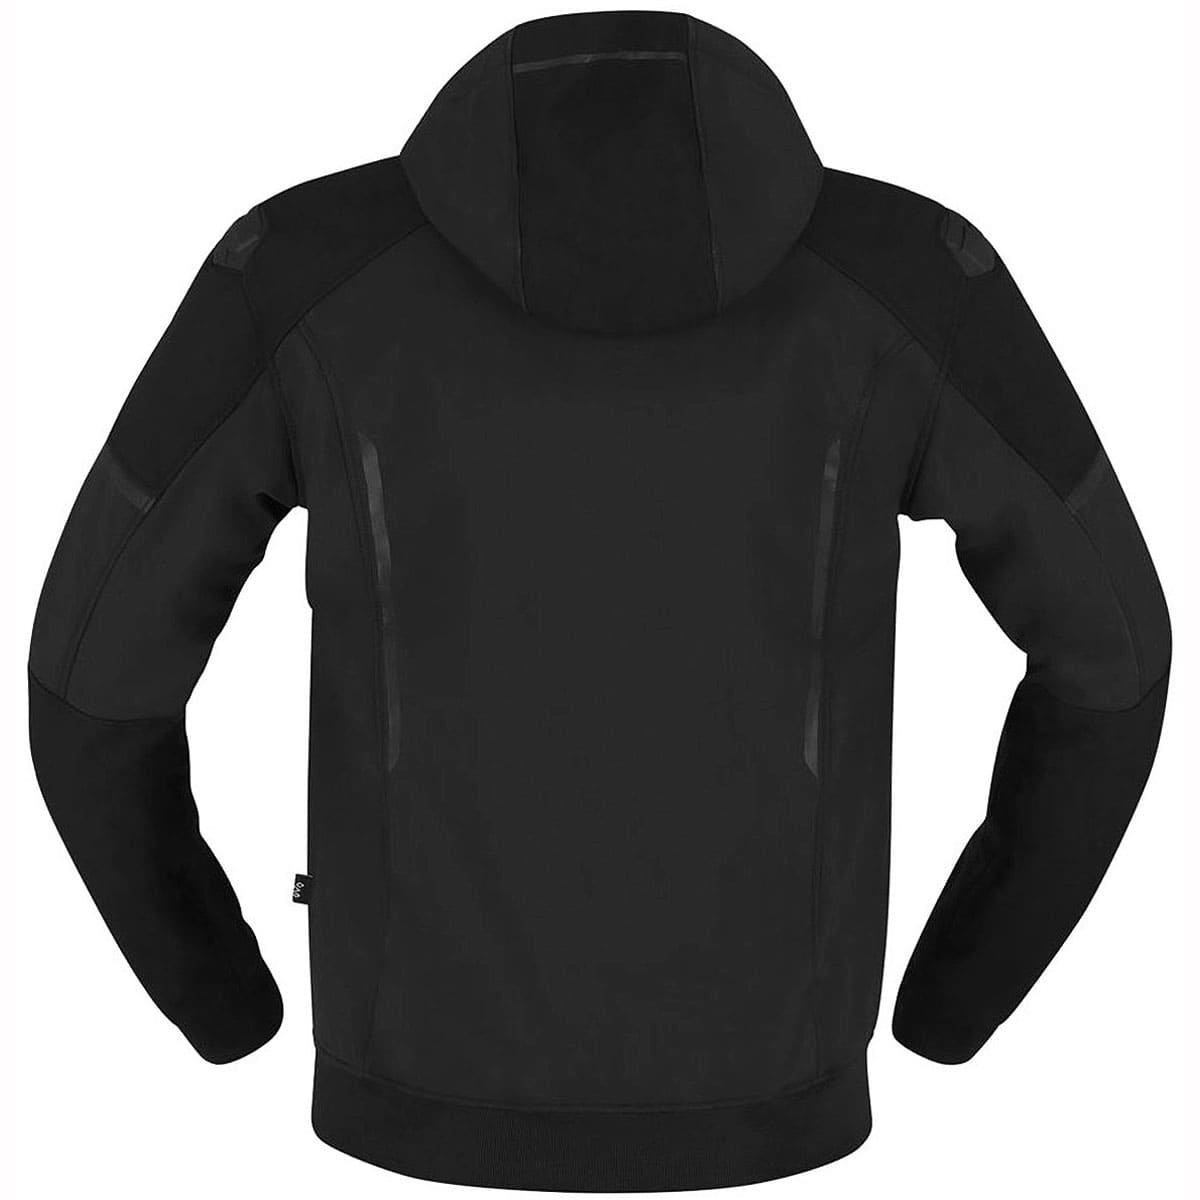 Waterproof motorcycle hoodie with a full set of D3O armour - back